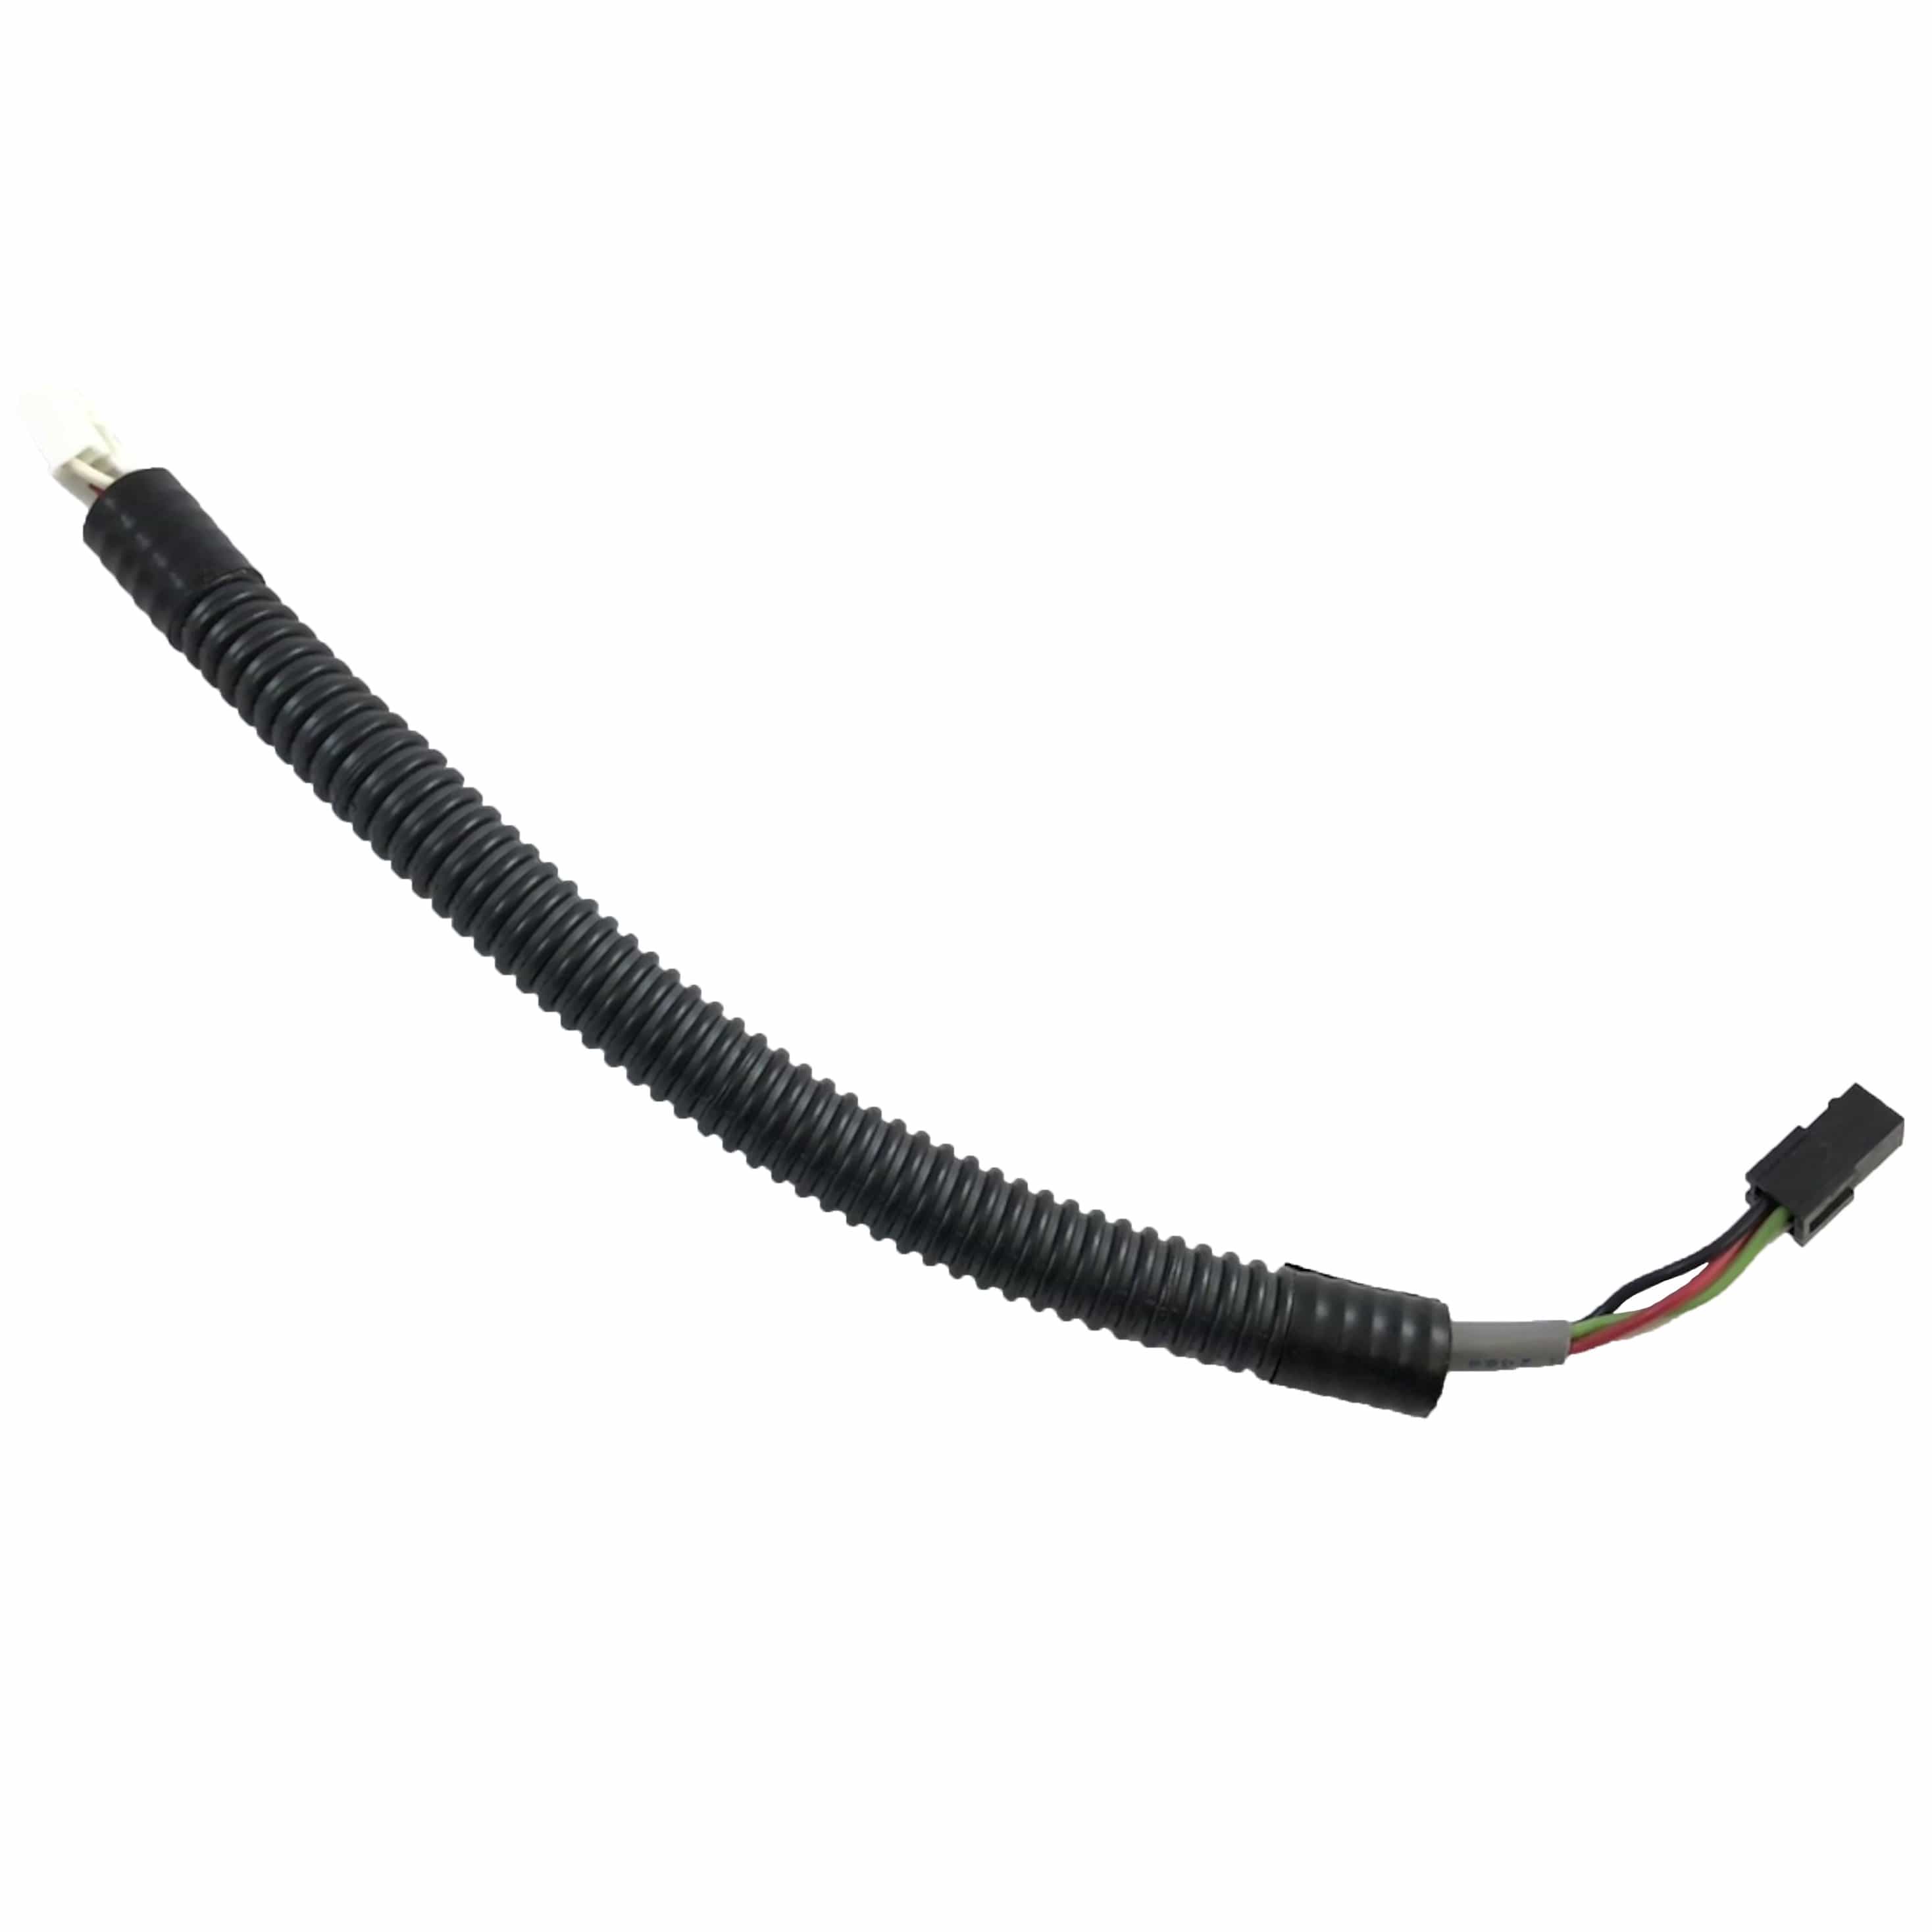 Atwood 66928 (Lippert 678831) Jumper Cable 9" L 4-WAY JST